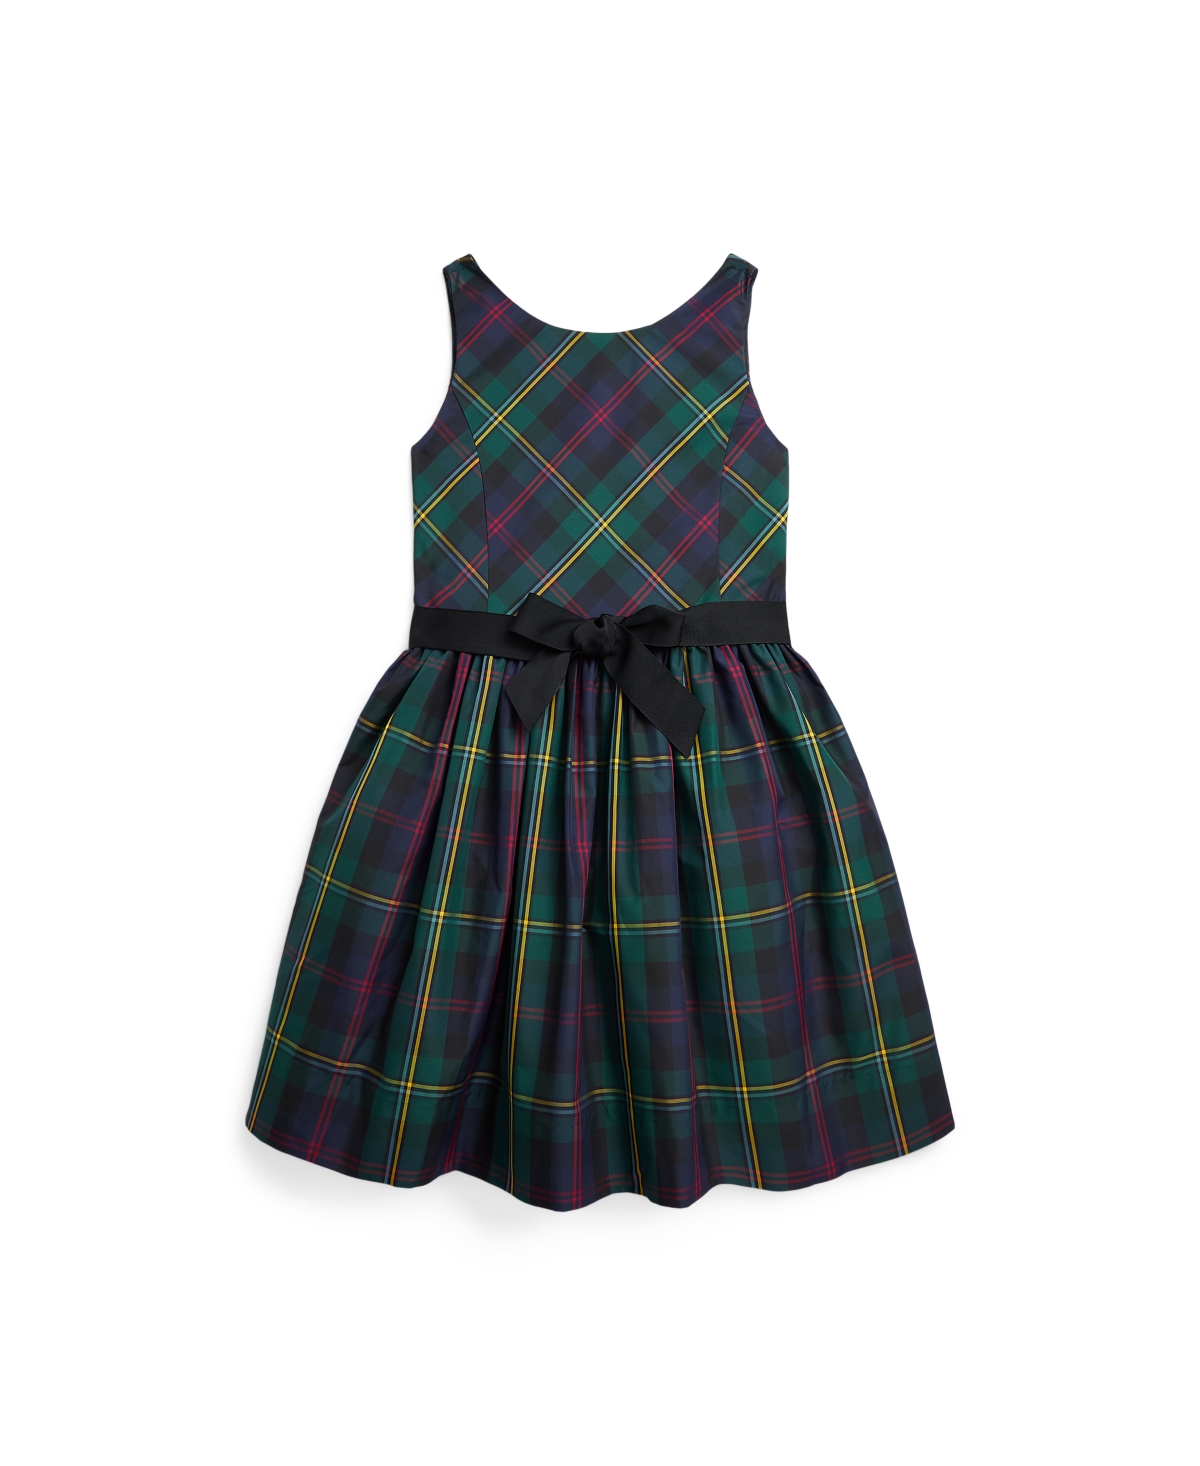 Polo Ralph Lauren Kids' Toddler And Little Girls Plaid Fit-and-flare Dress In Green-black Multi